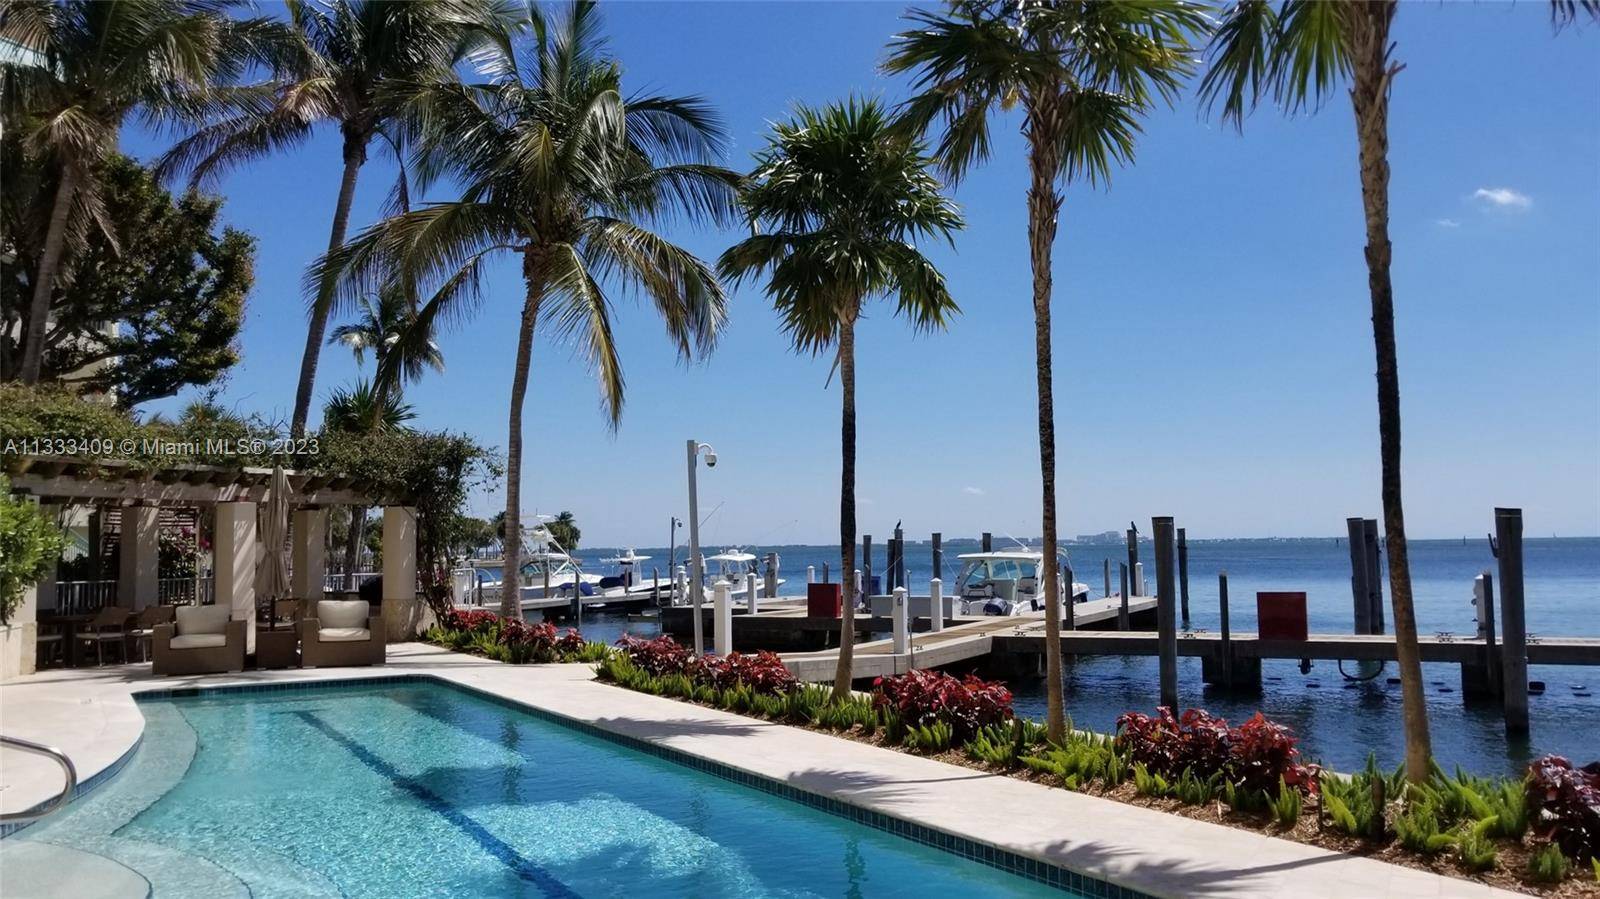 Private waterfront residence with only 10 units in the heart of Coconut Grove, right on Biscayne Bay with direct ocean access ; deep water Marina, dock 17 x 46 included ...